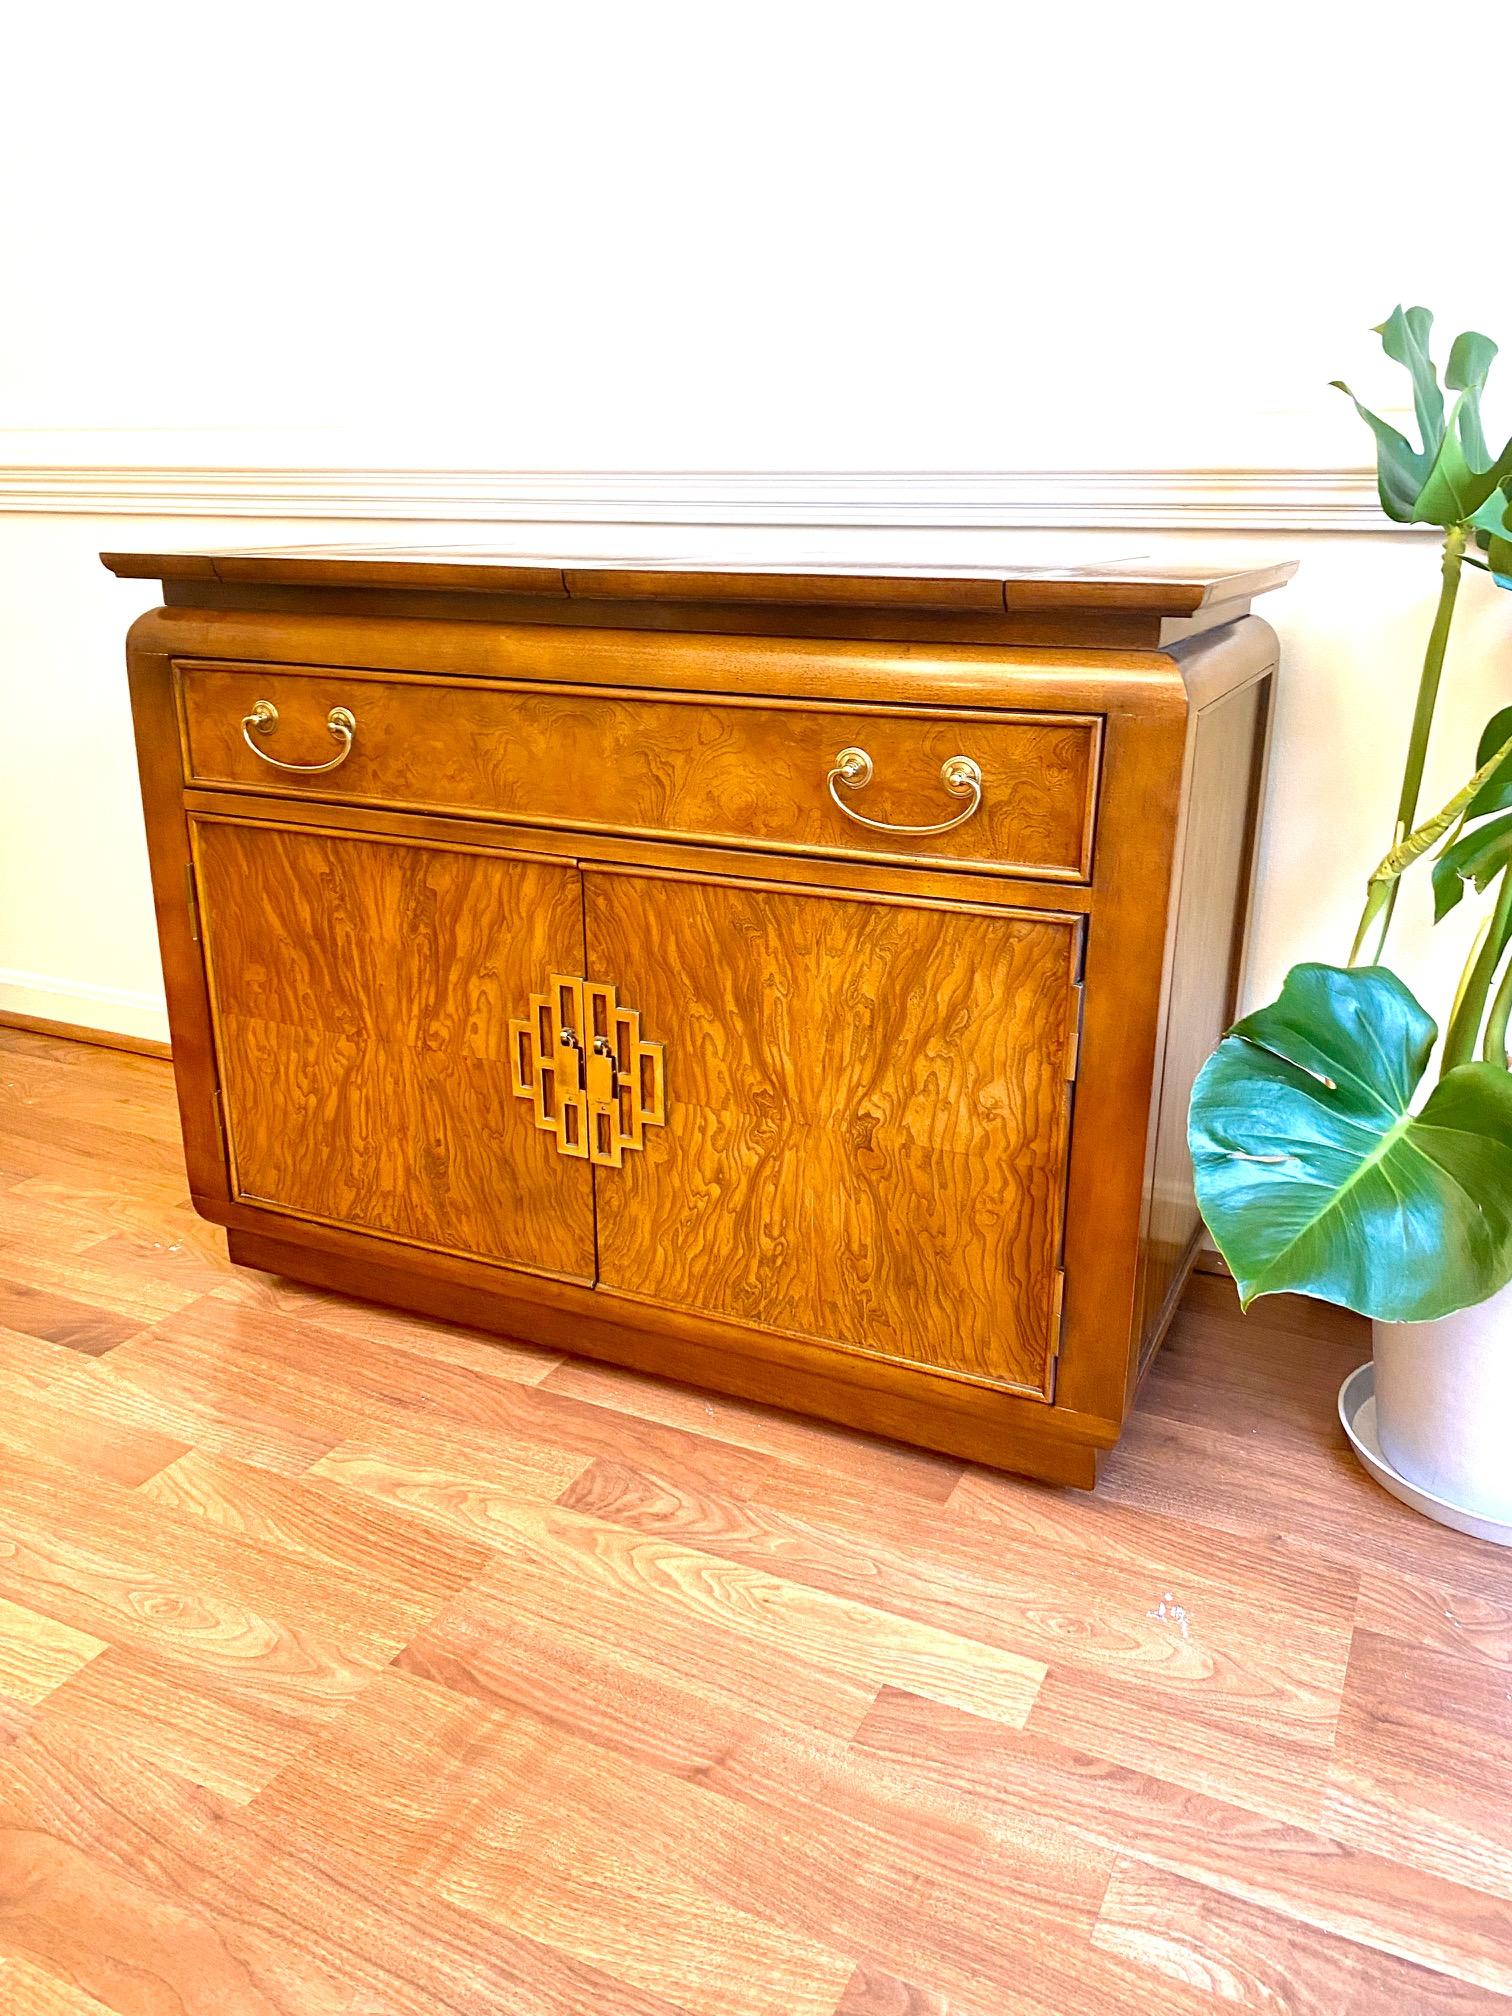 A stunning Art Deco style maple burlwood dry bar cabinet designed by Raymond Sabota for Century Furniture as a part of the Chin Hua collection circa 1970s. The burl front shines against the chinoiserie style brass hardware and pulls, and the top